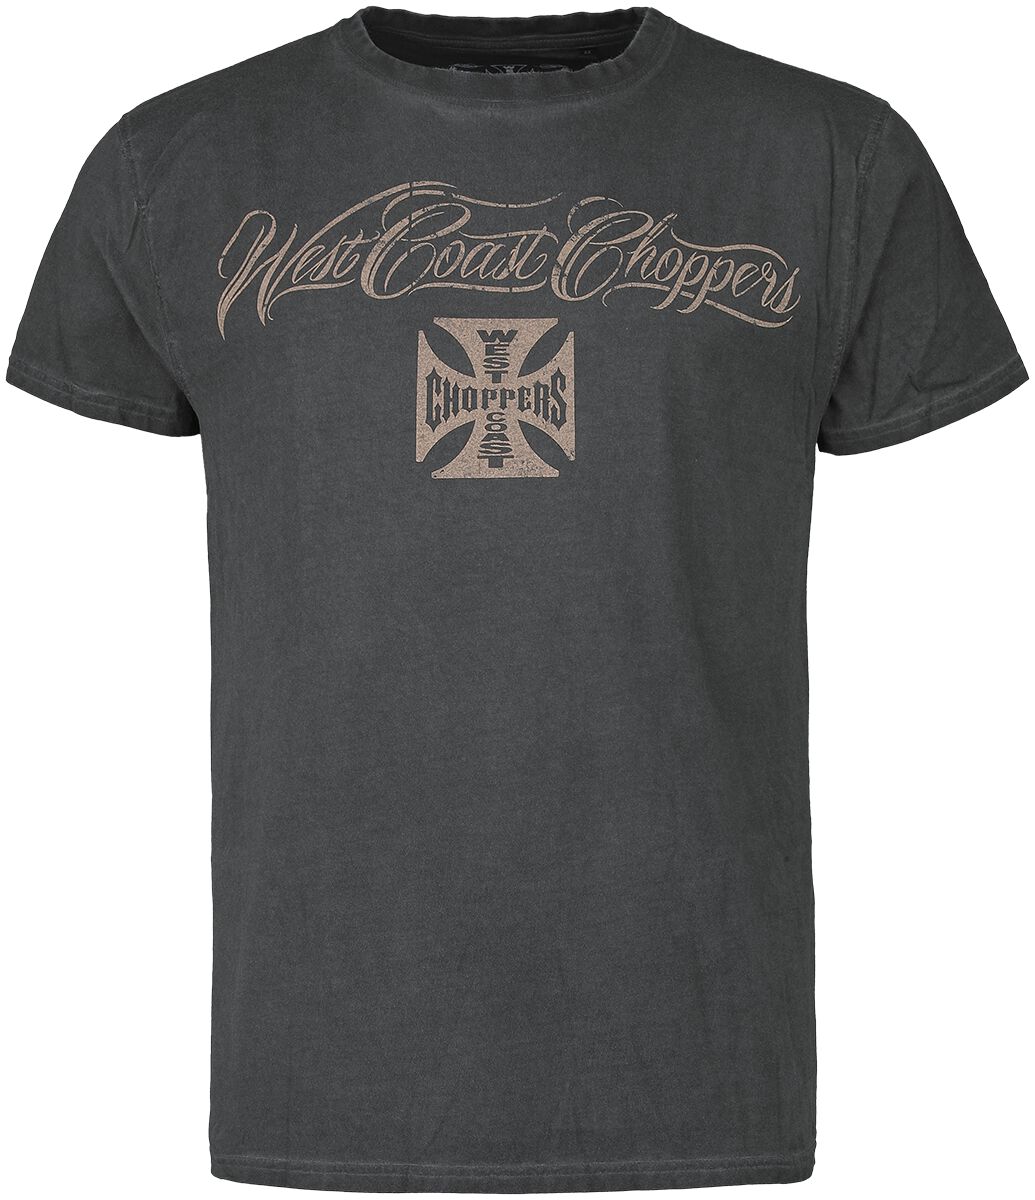 West Coast Choppers Eagle Crest T-Shirt anthrazit in S